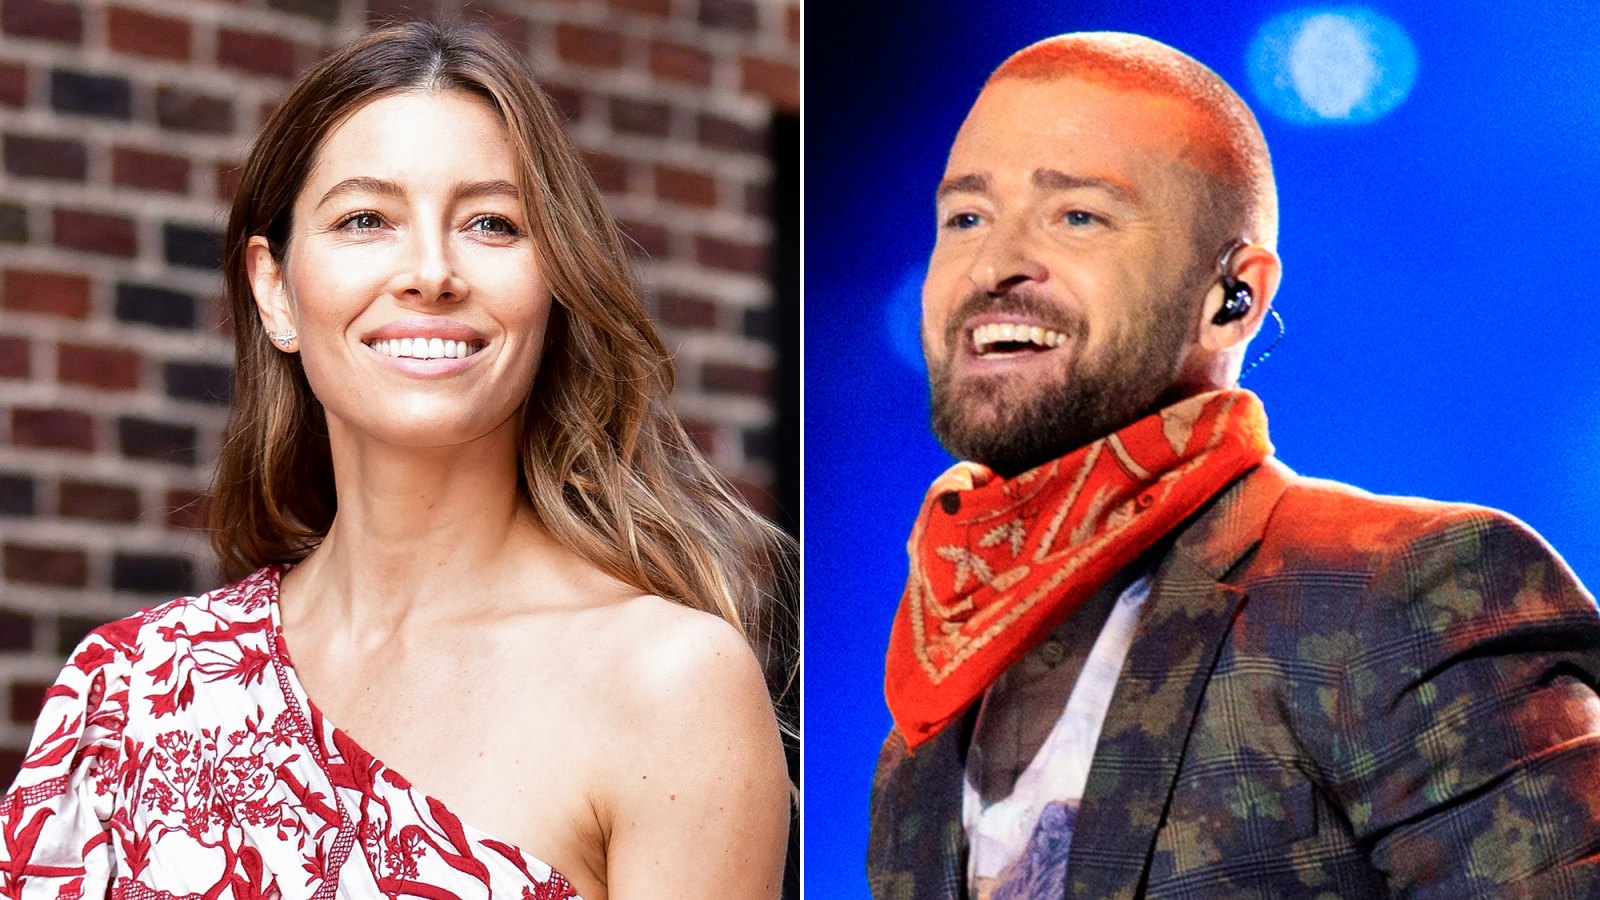 Jessica Biel Raves About Traveling With Justin Timberlake as He Tours (today show)